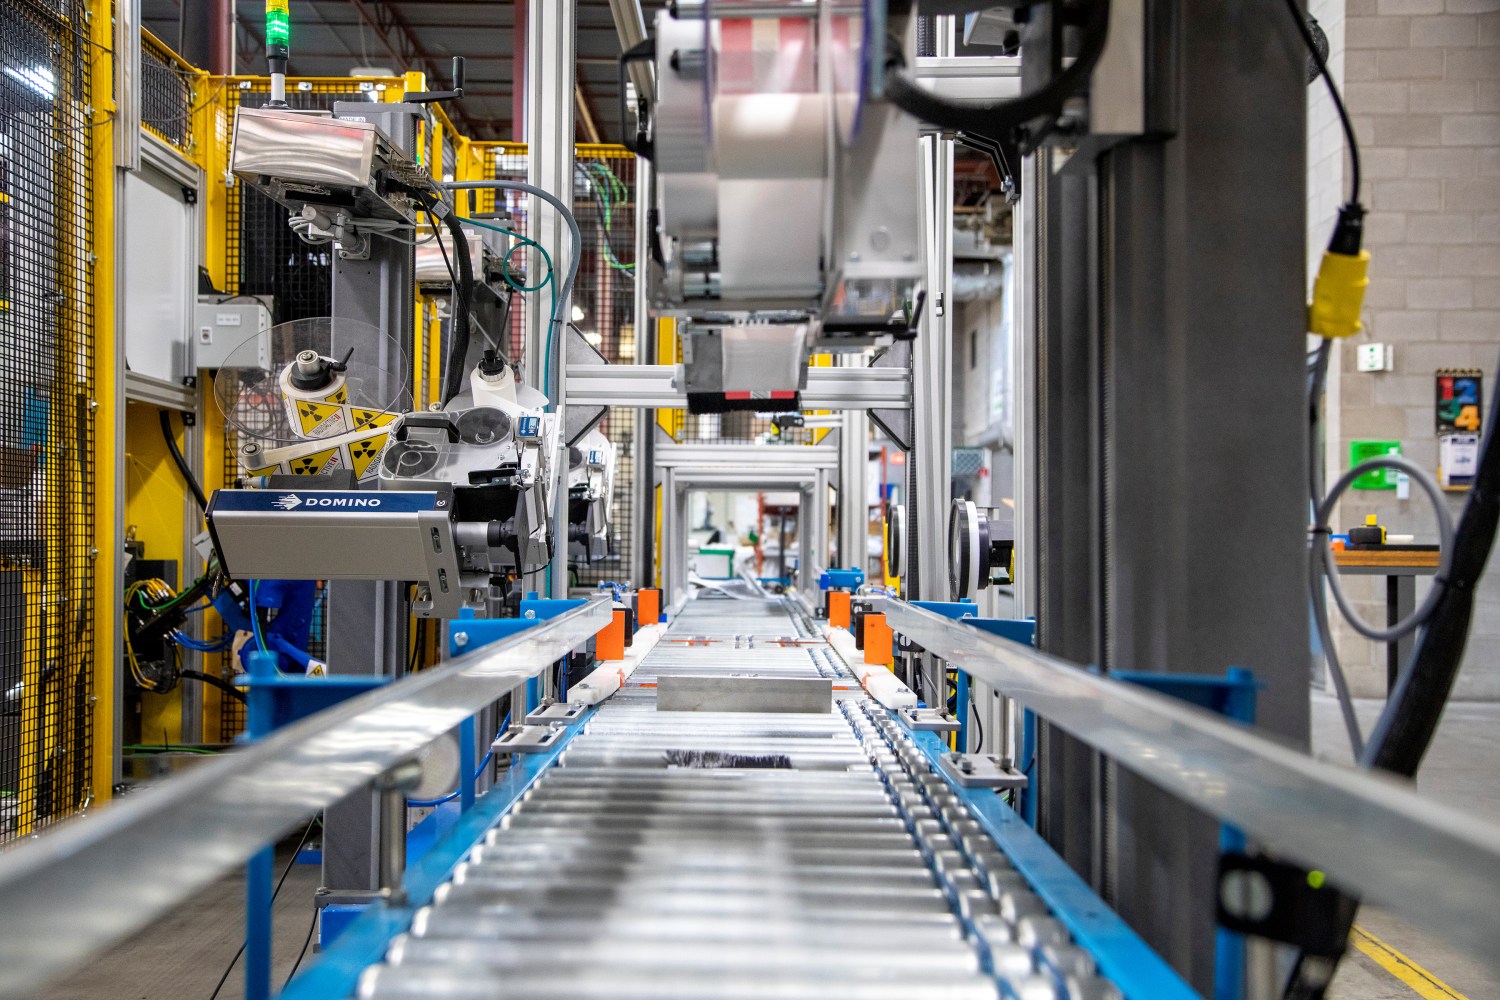 An automated packing line at a factory